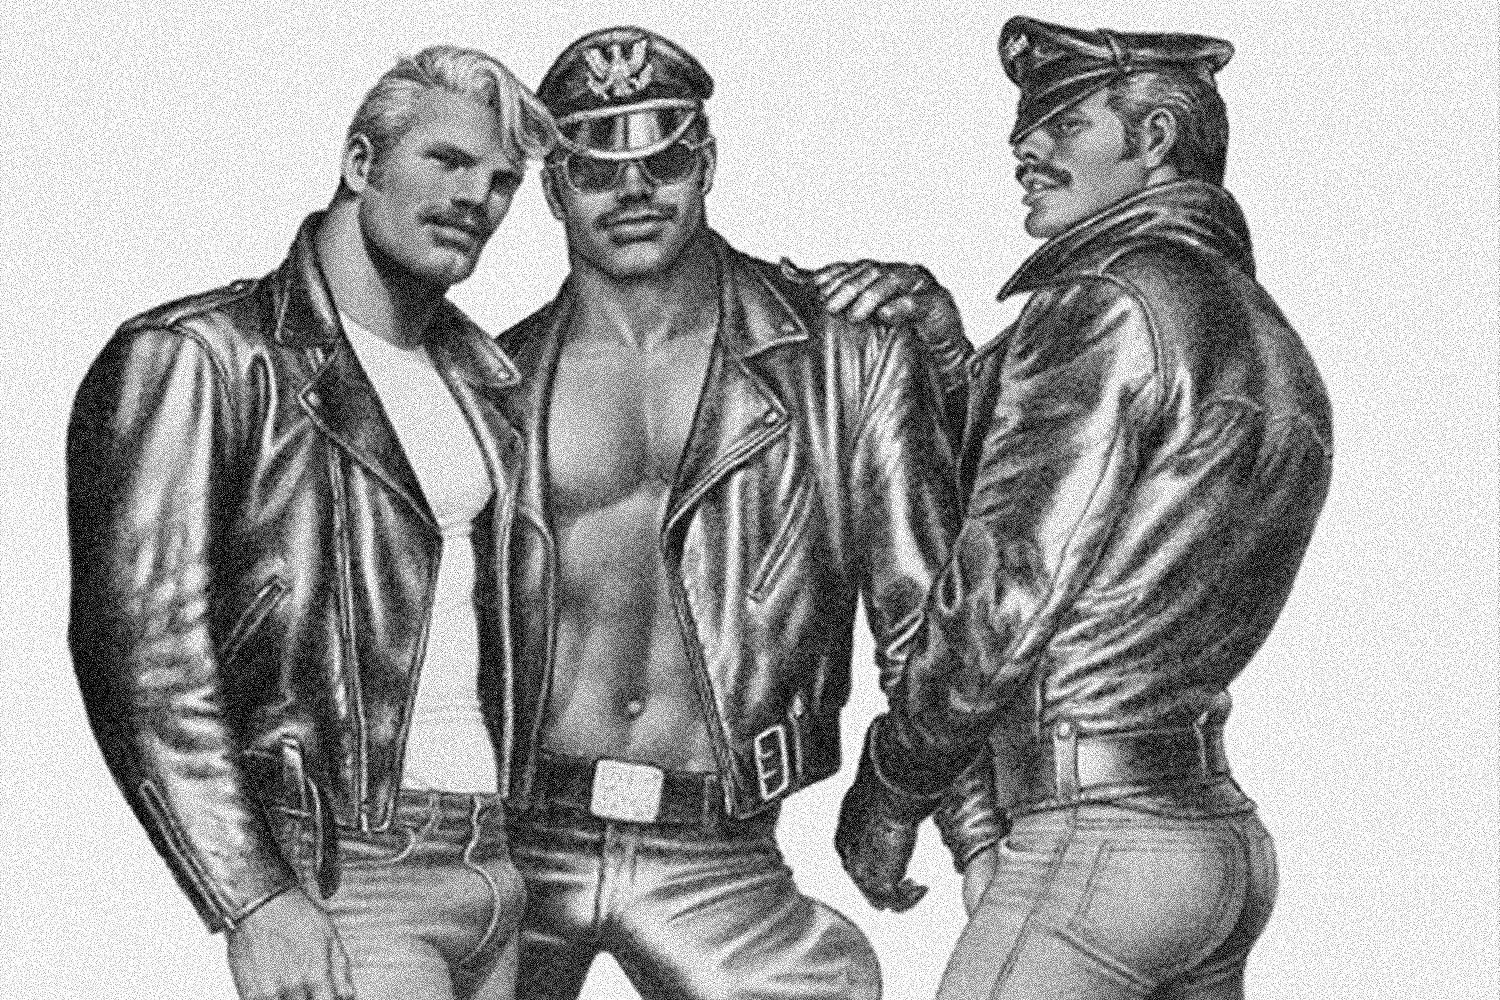 Who designed these uniforms—Tom of Finland?: the real story behind these  viral photos of Spanish soldiers